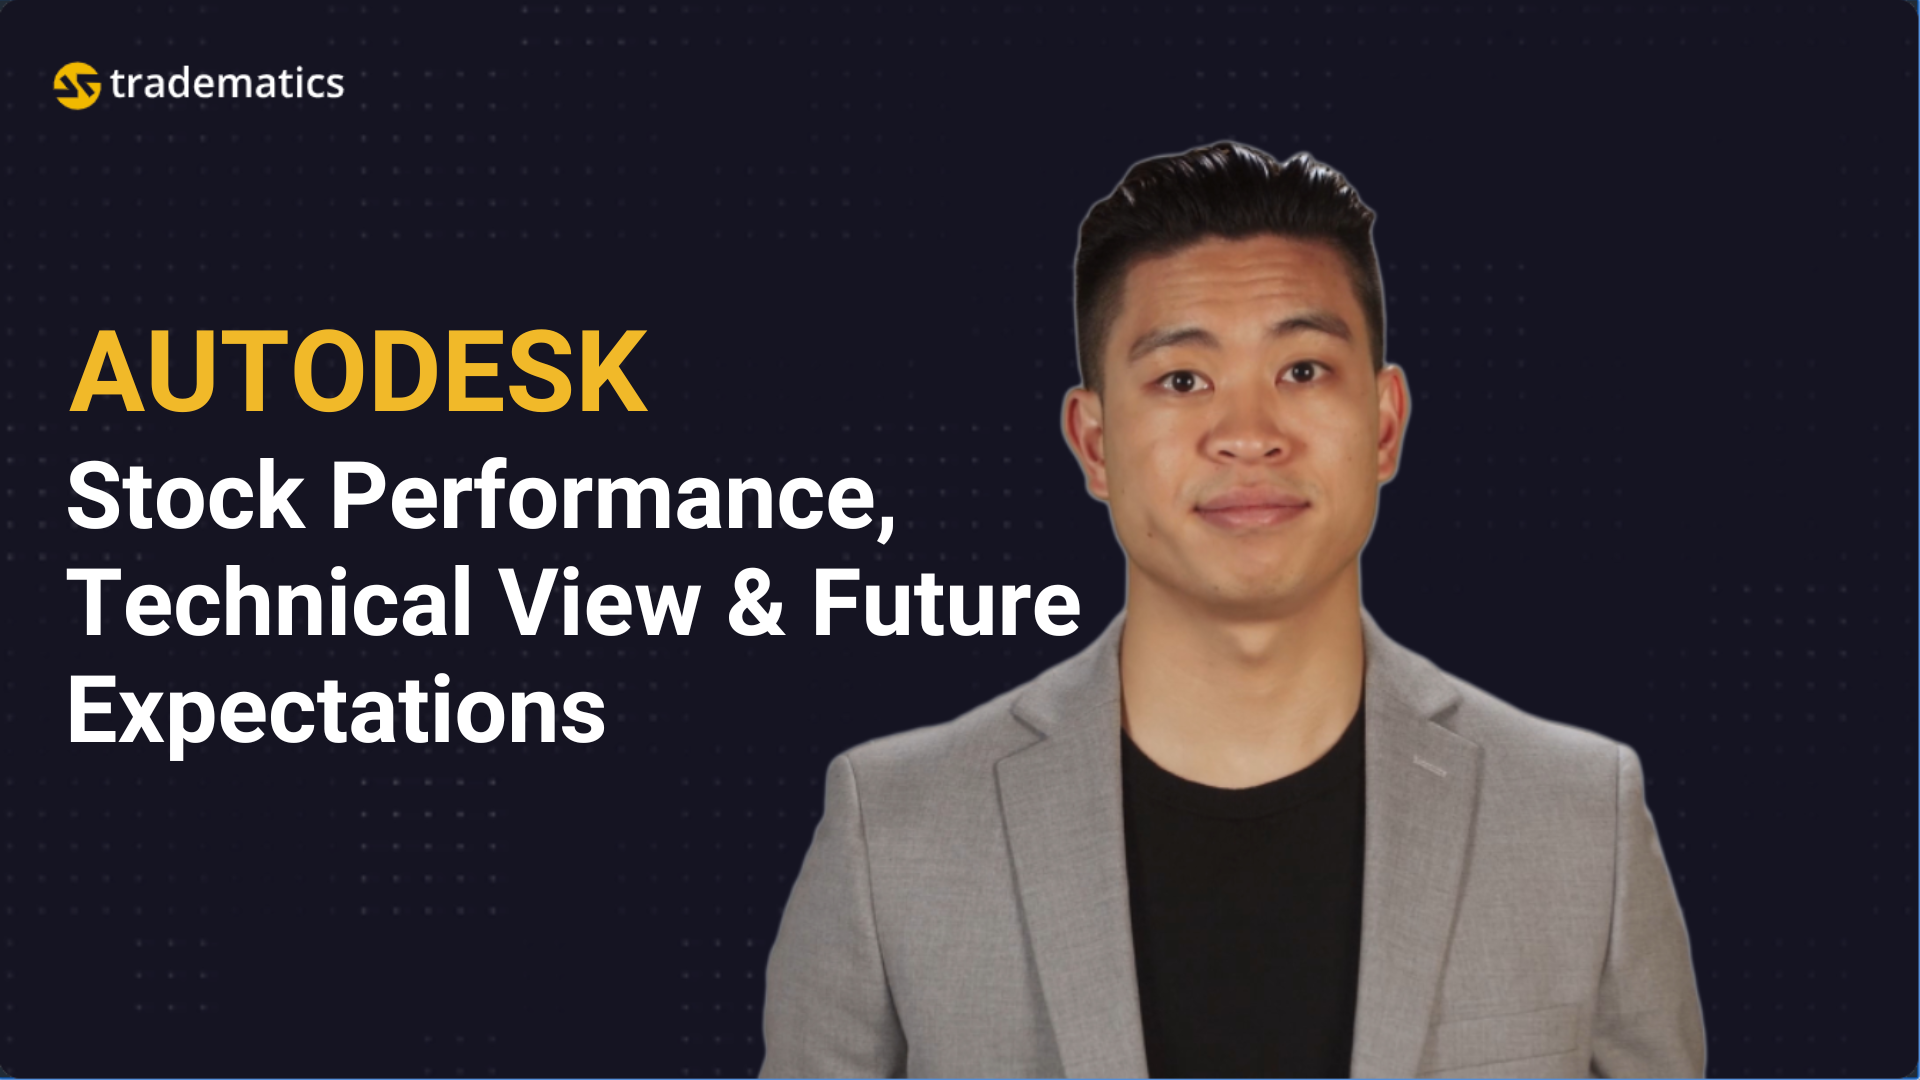 Tradematics | #19 AUTODESK | Stock Performance, Technical View & Future Expectations